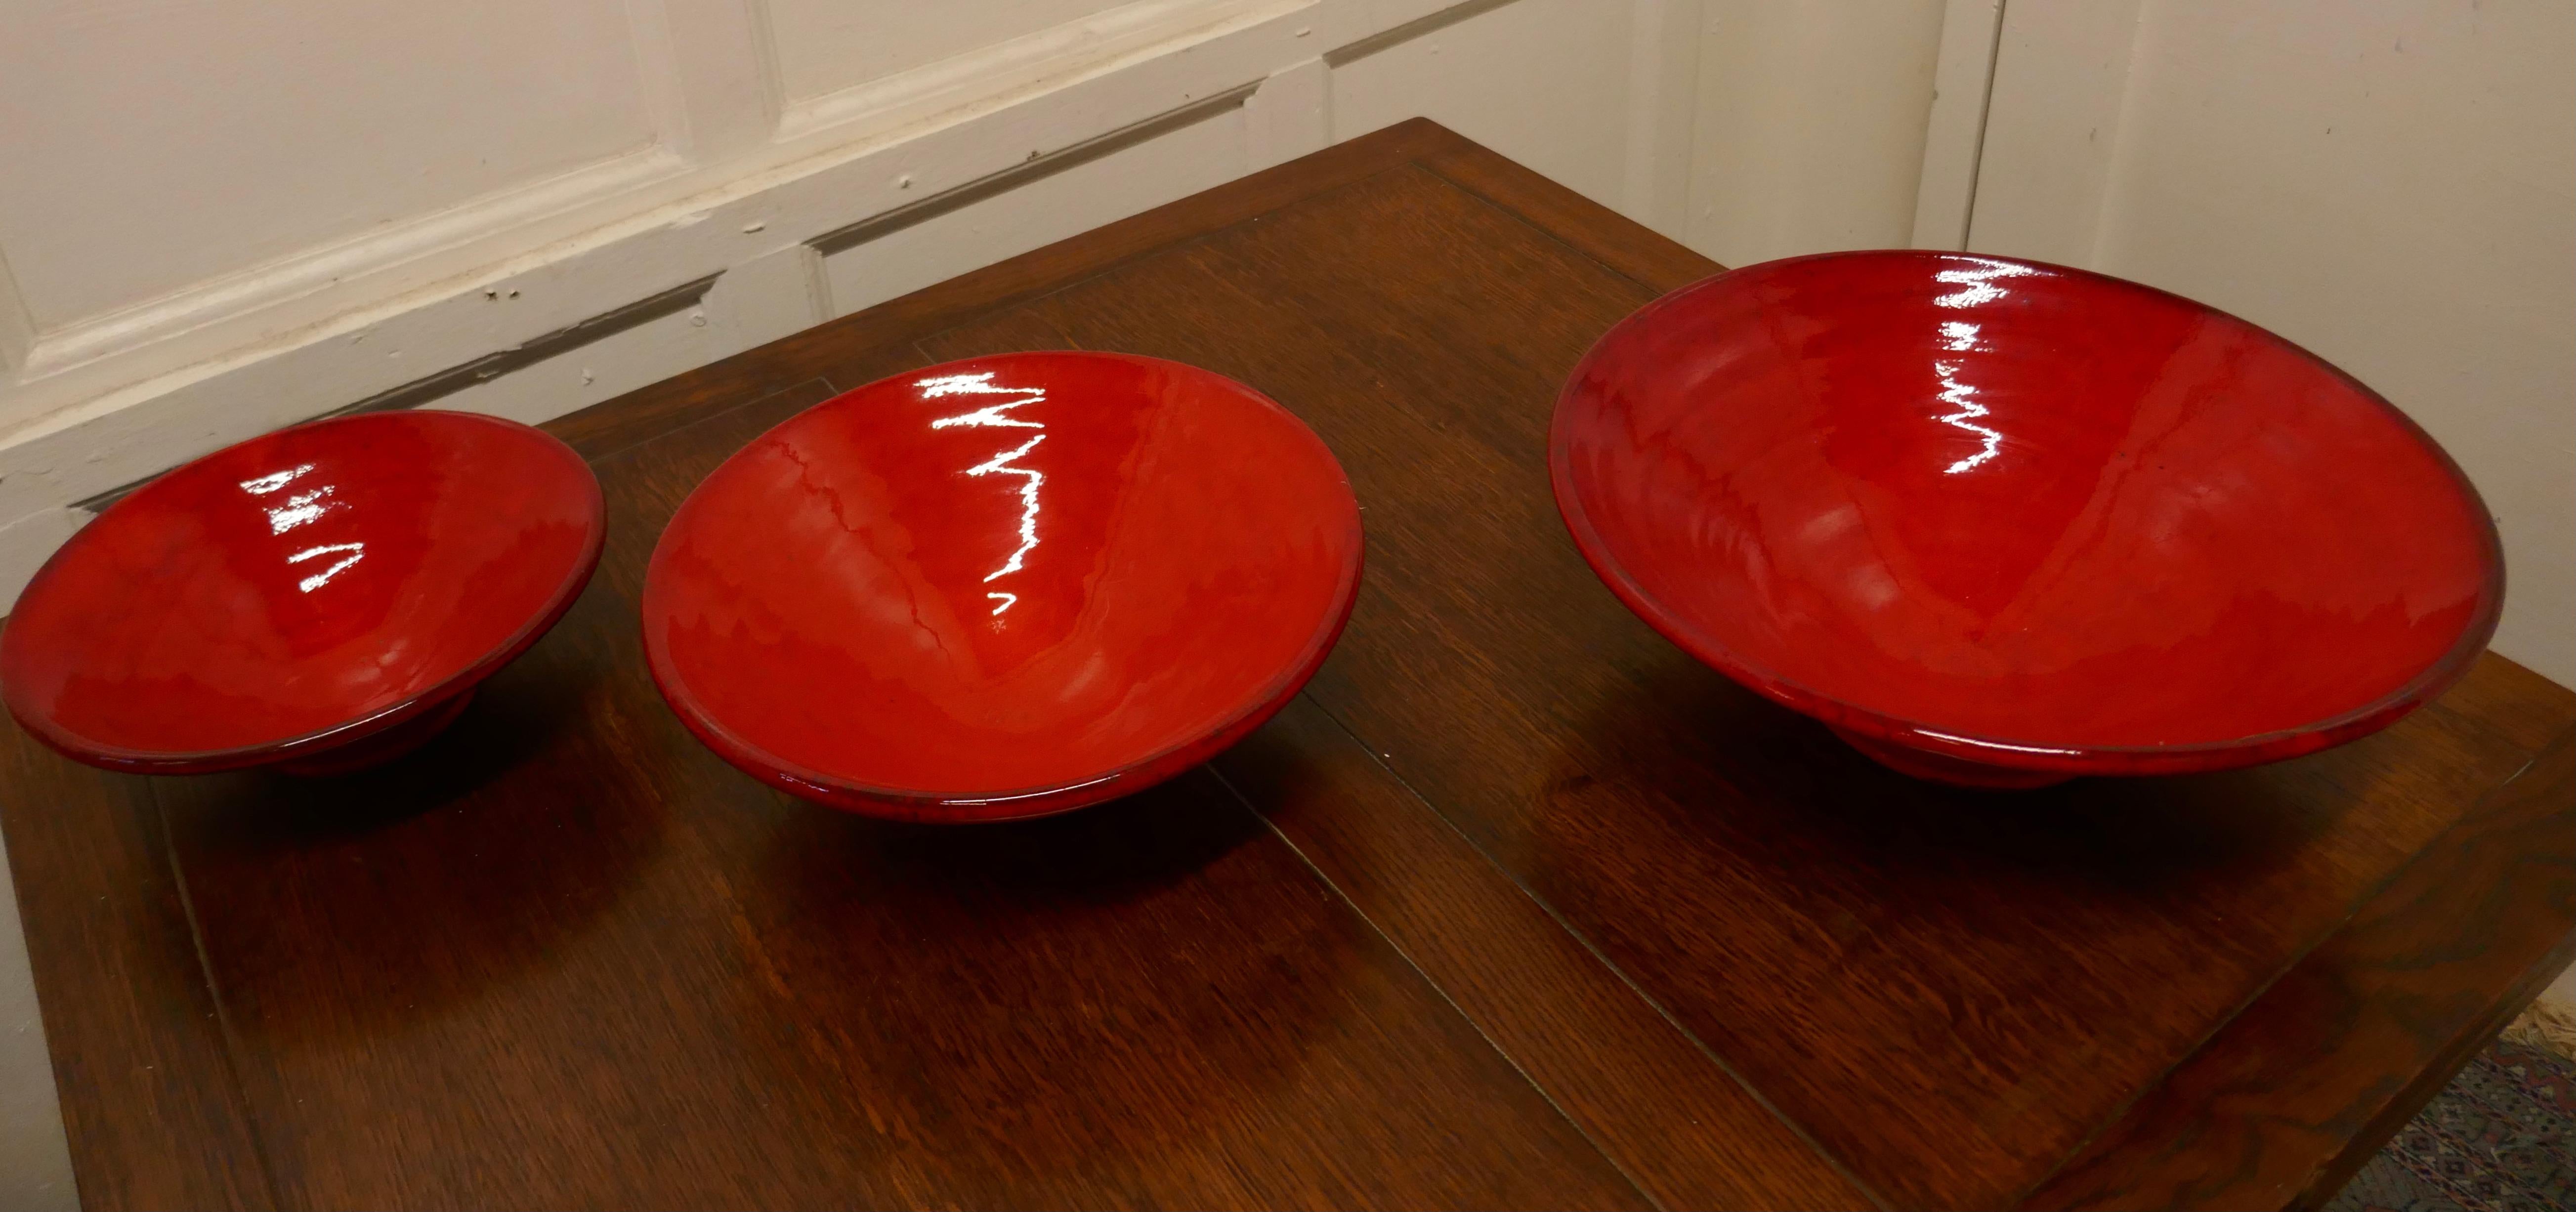 Set of Three Bright Red Terracotta Dutch bowls

A wonderful bright coloured set made in glazed terracotta in the Dutch style, in very good condition, the largest bowl is 5” high and 15” in diameter 
TNV123.